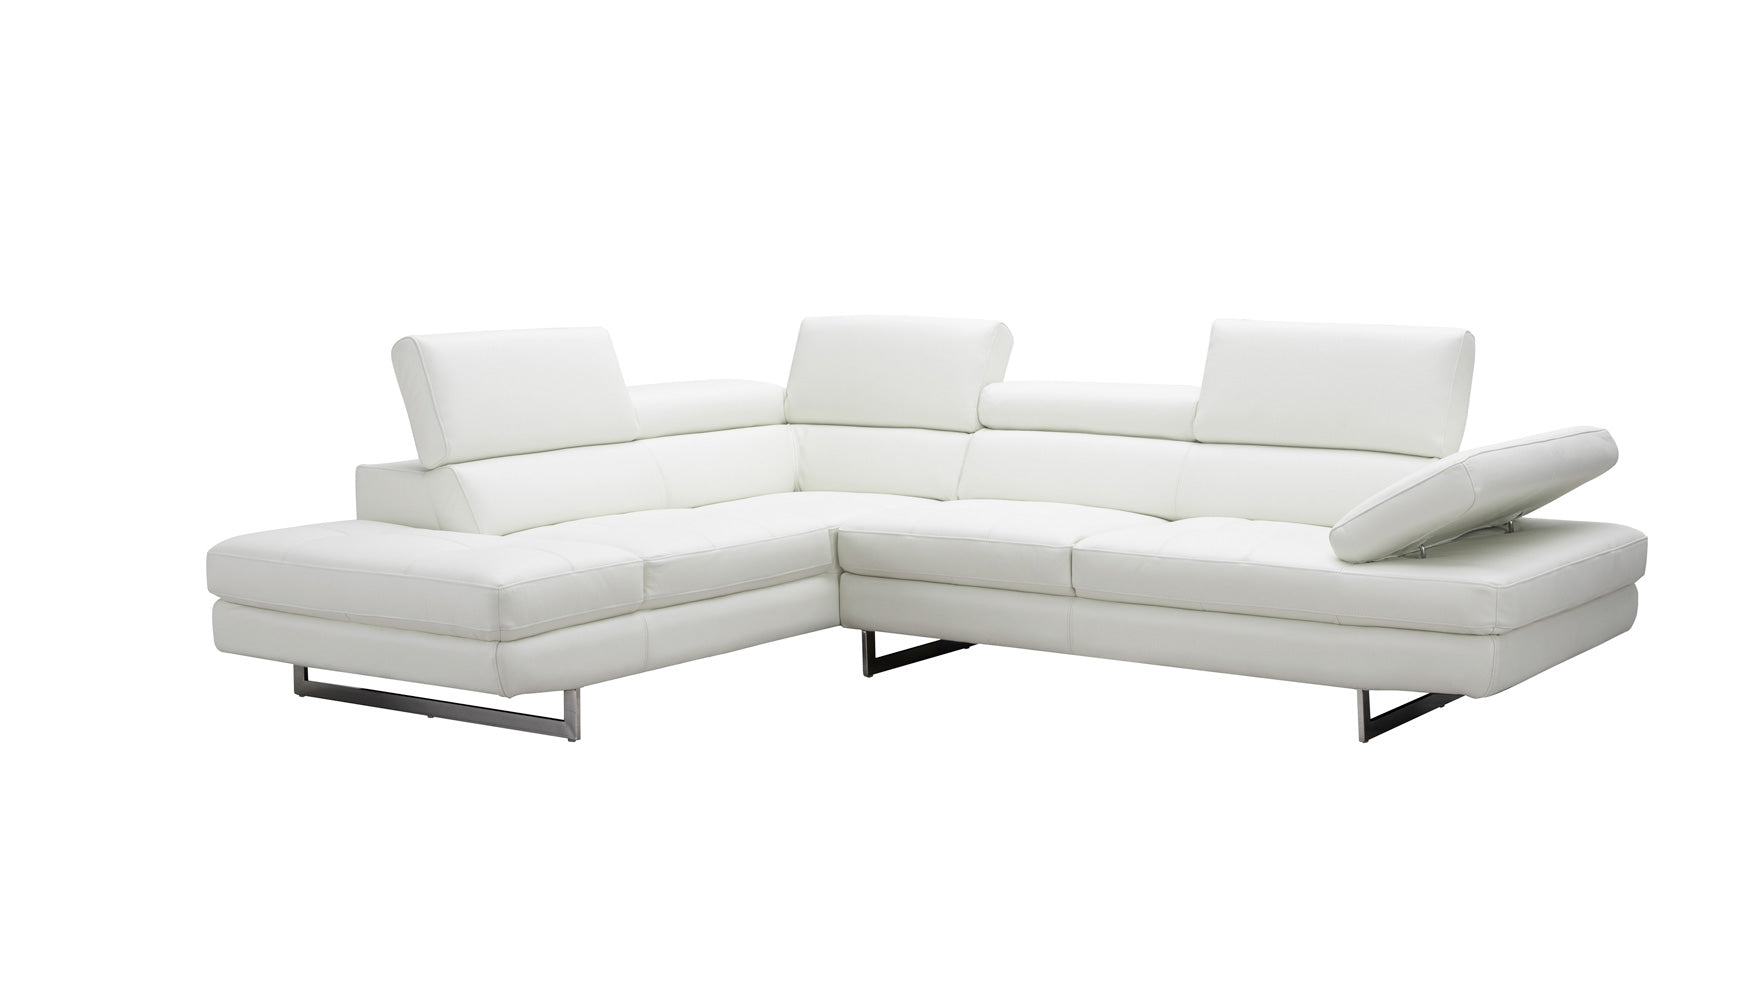 A761 Sectional in Off White | J&M Furniture